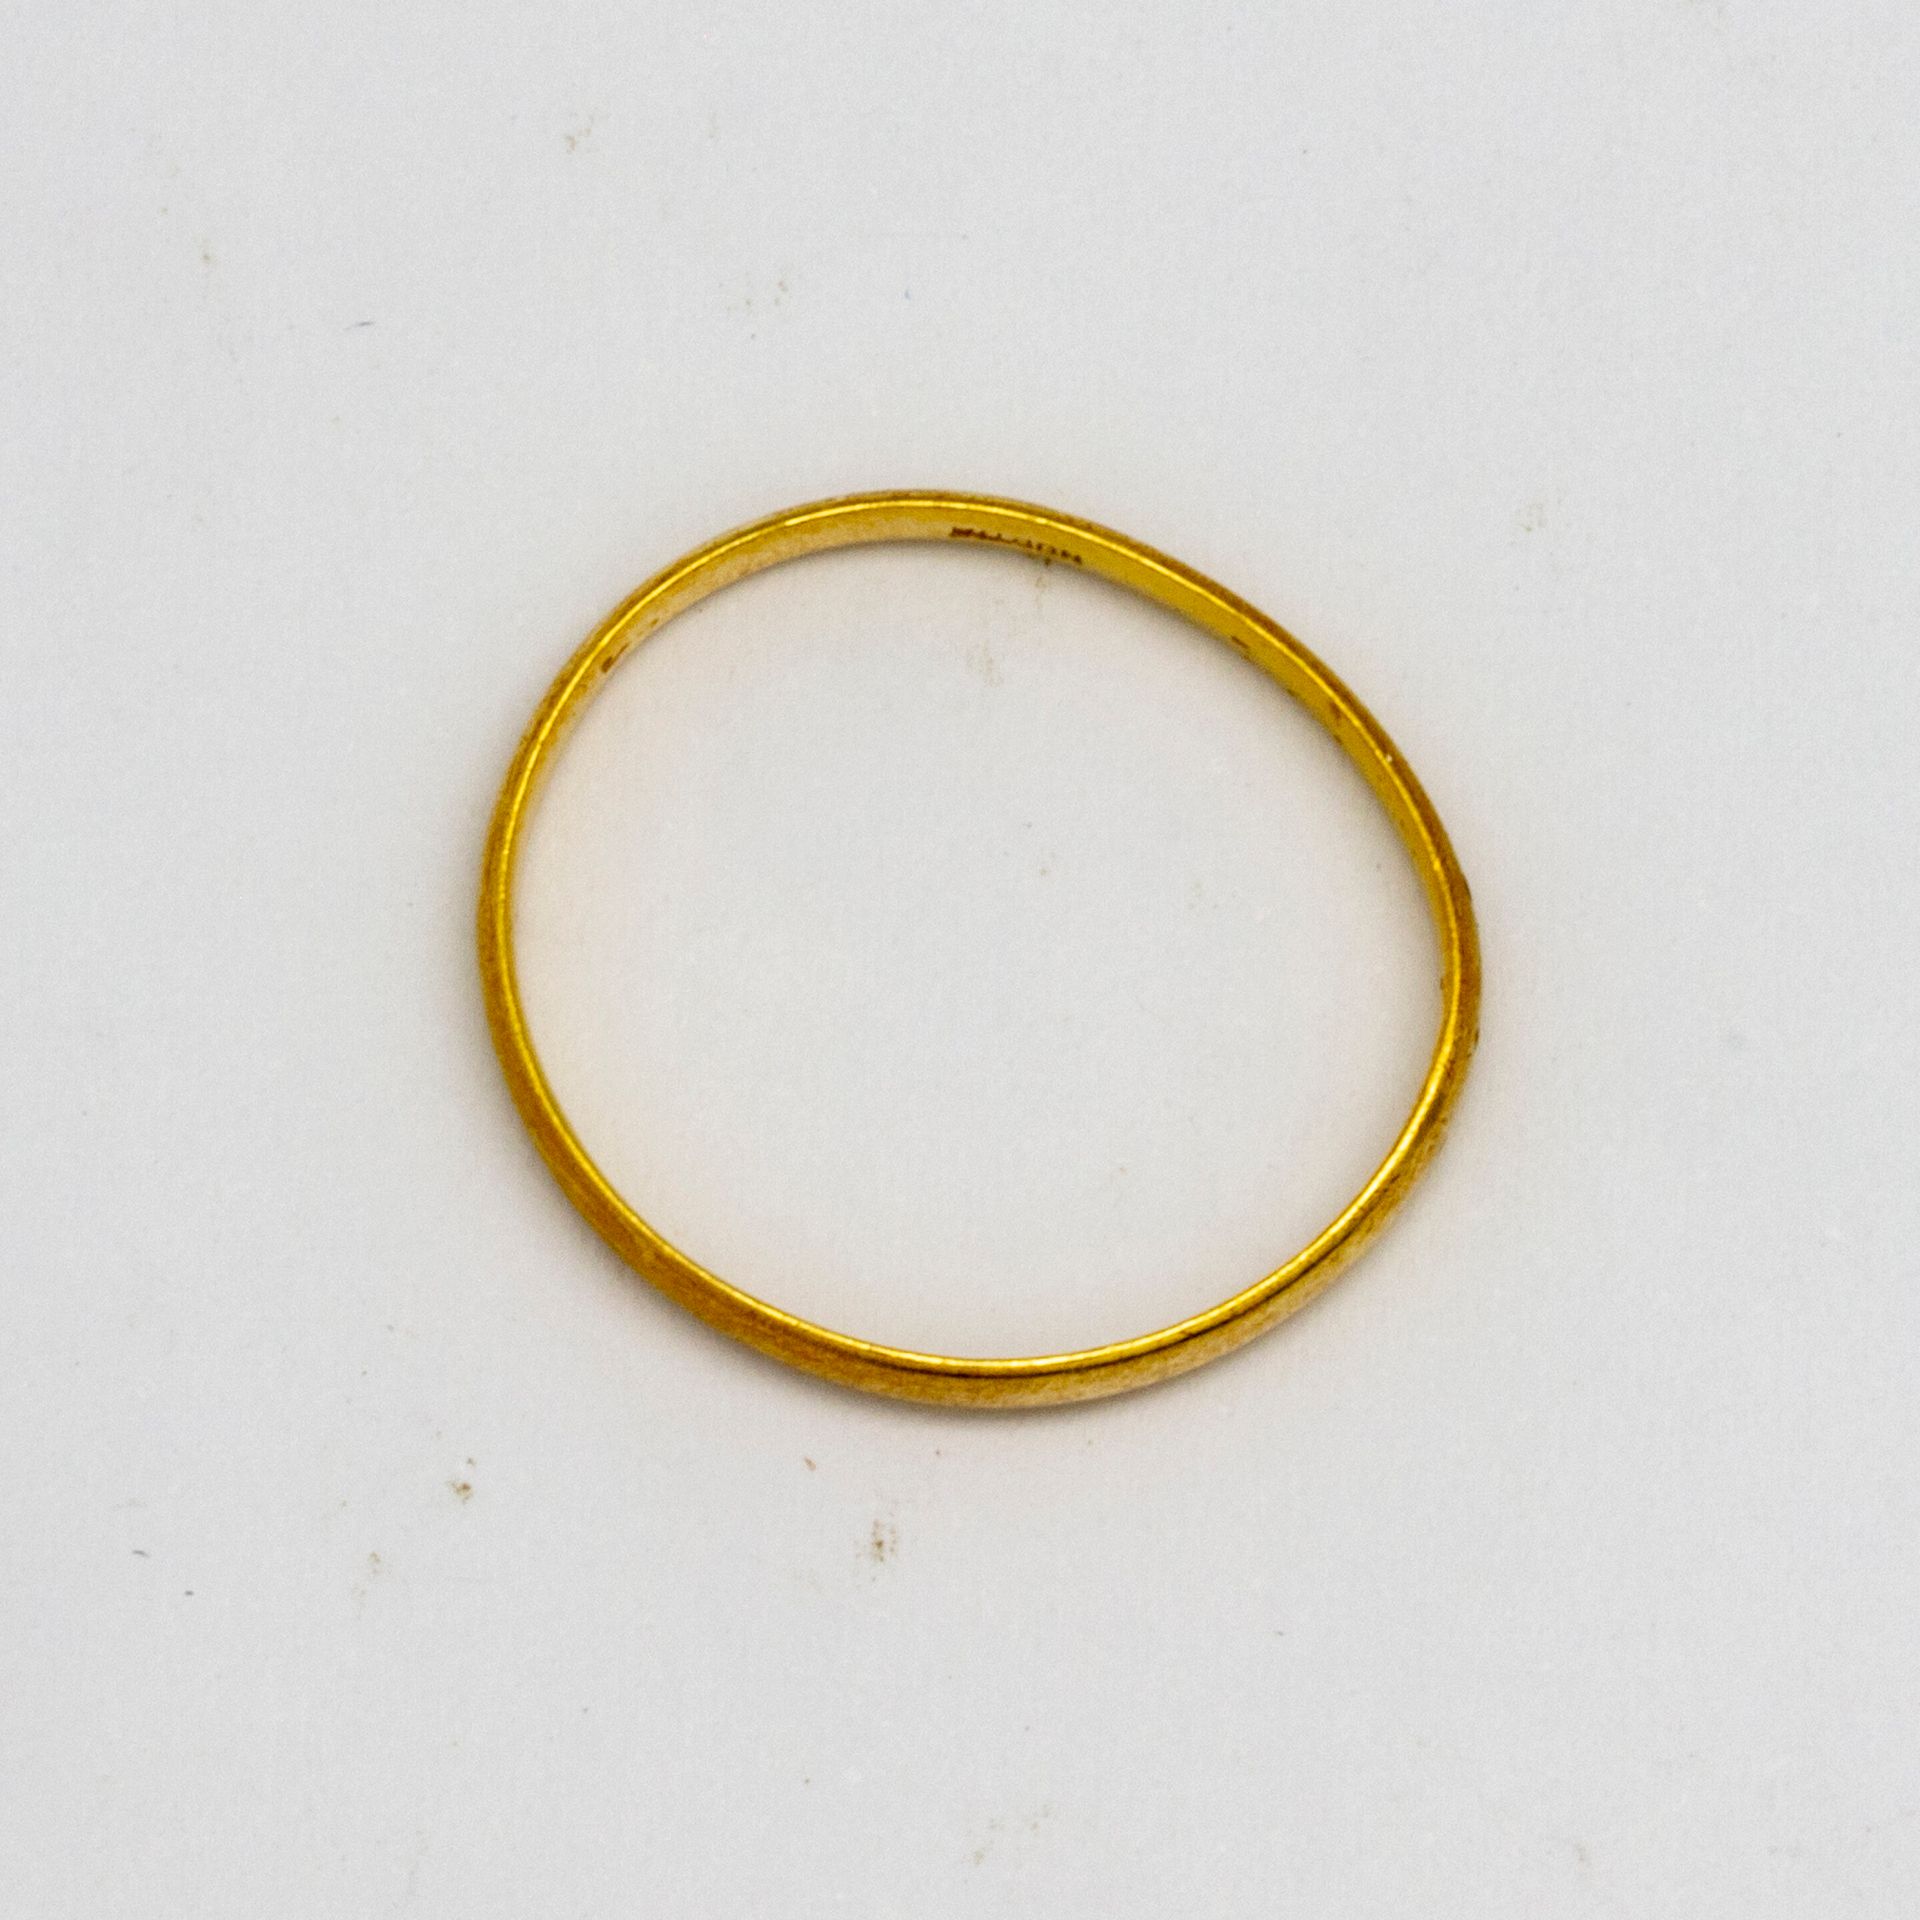 Null Yellow gold wedding ring 
Weight : 1 g